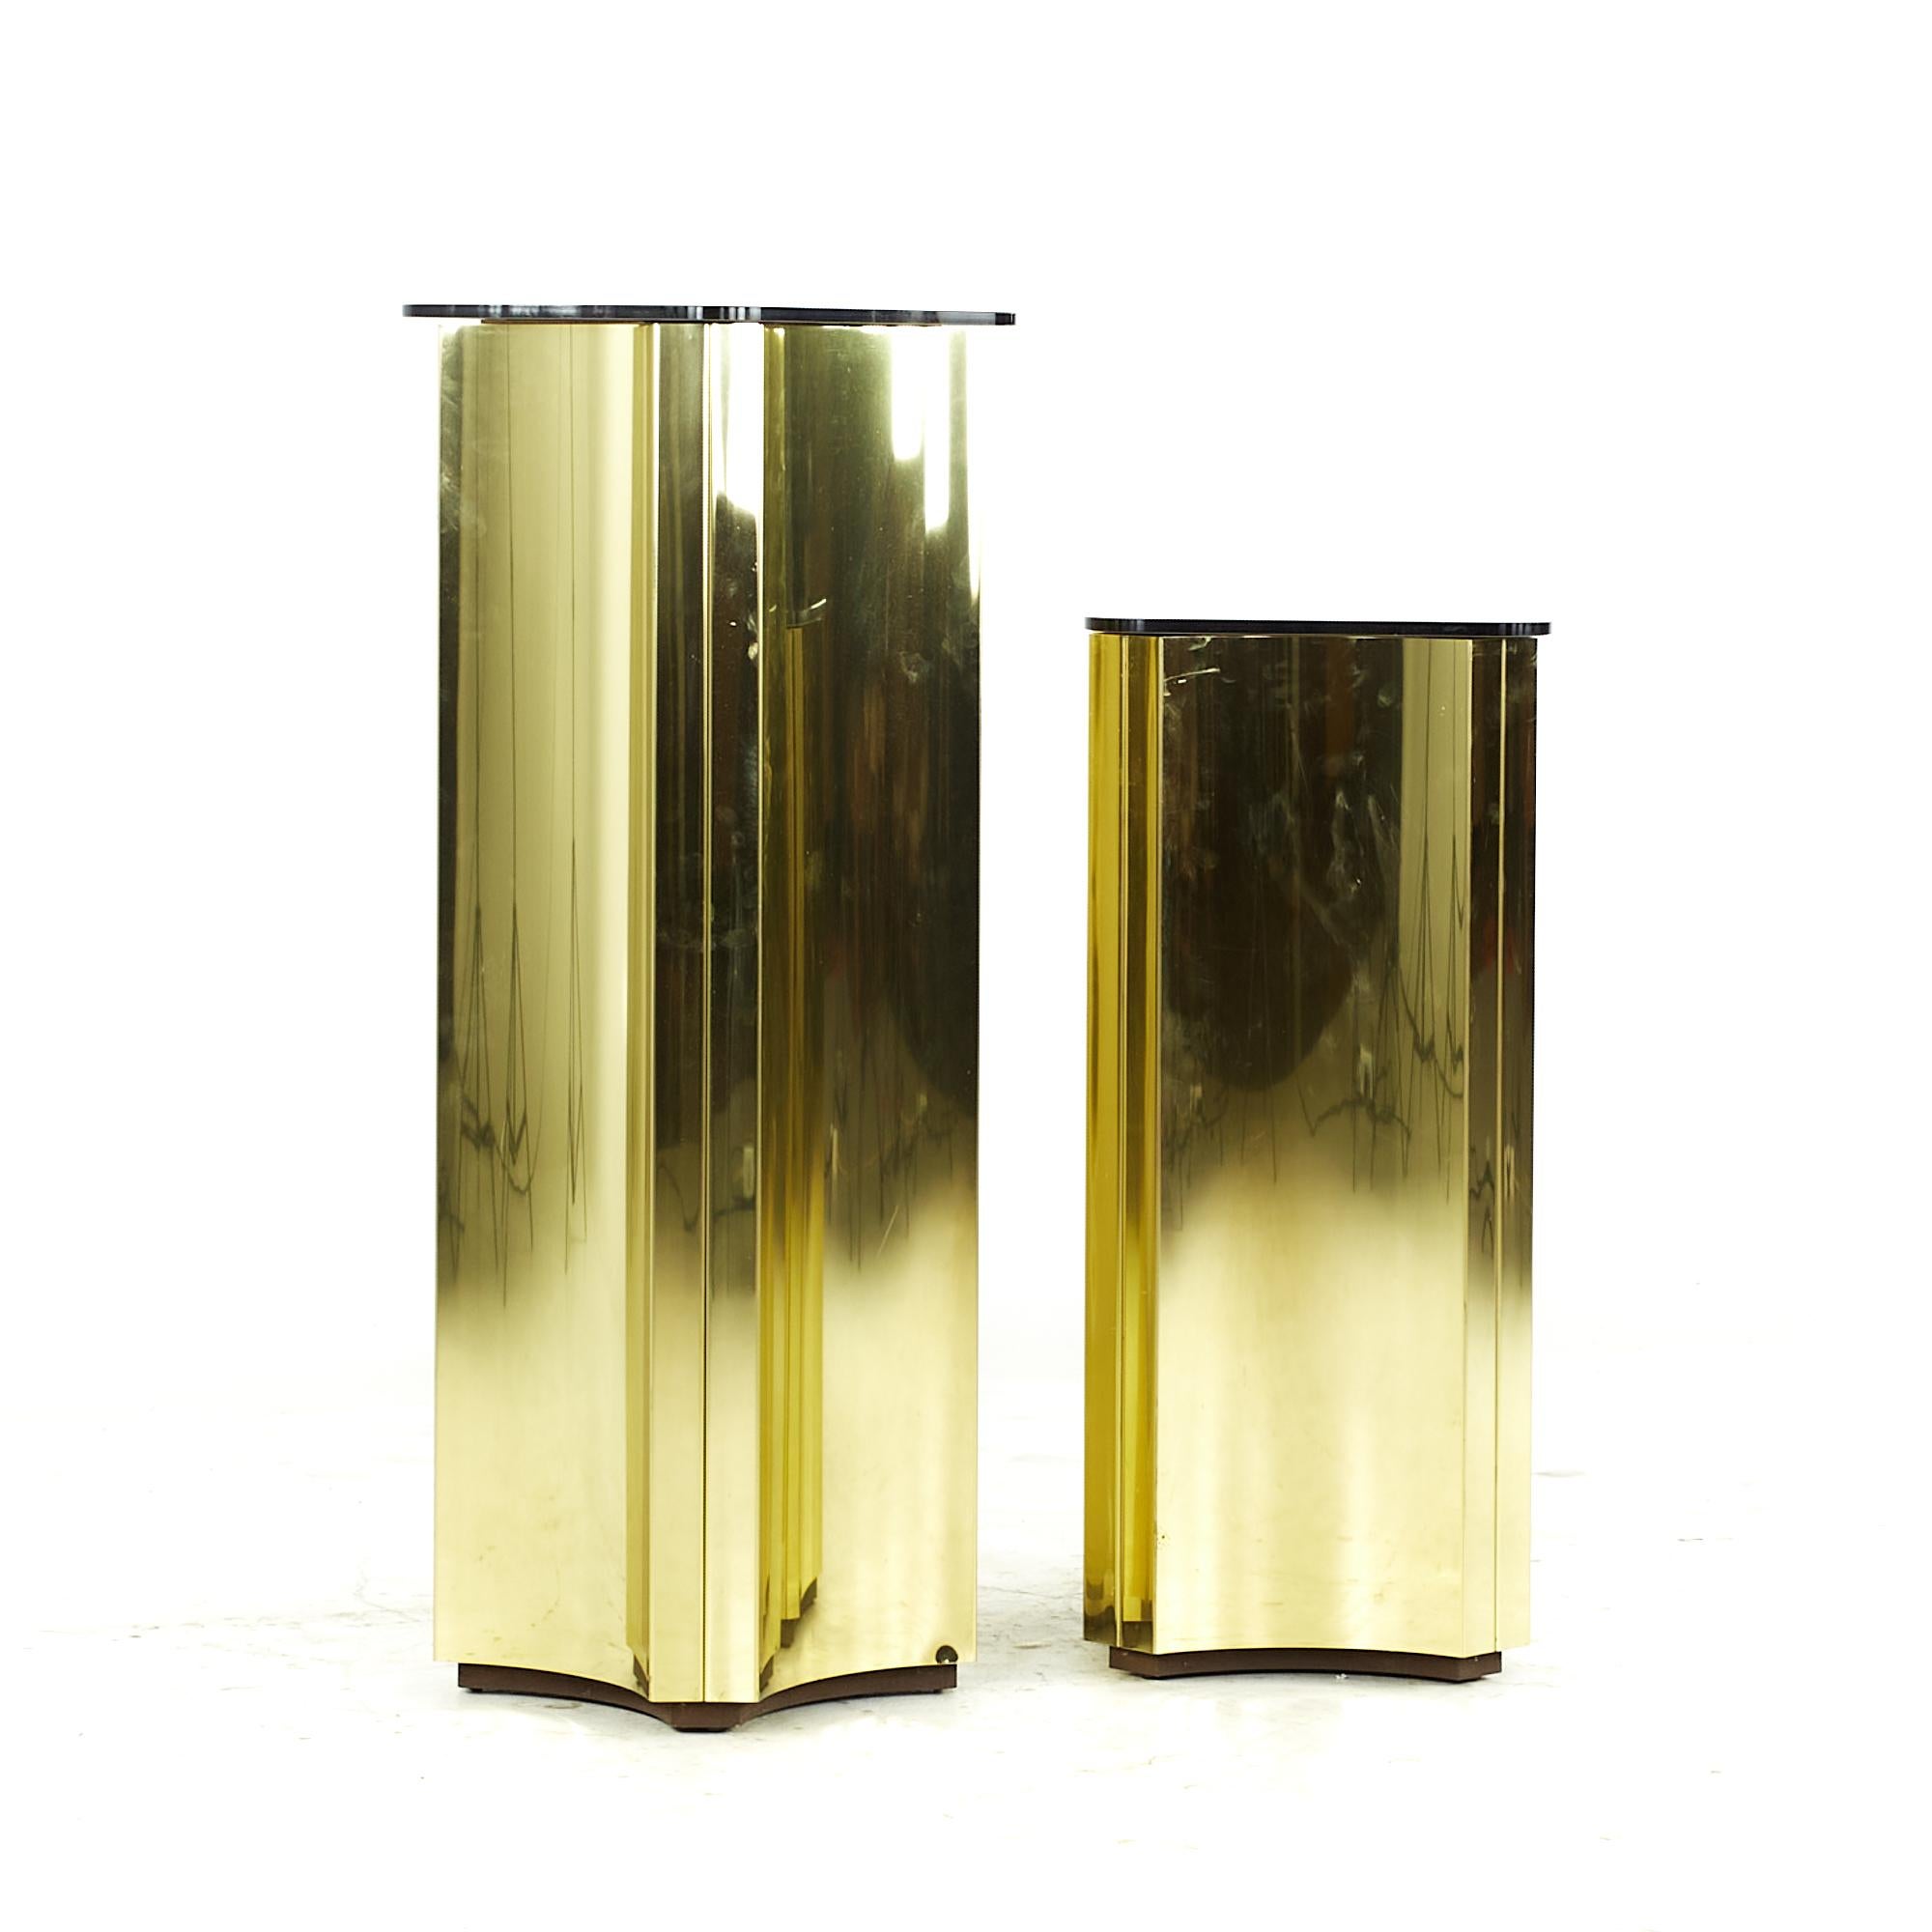 Curtis Jere midcentury Brass Display Pedestals - Pair

The small pedestal measures: 12.5 wide x 12.5 deep x 28.25 inches high
The large pedestal measures: 12.5 wide x 12.5 deep x 36.25 inches high

All pieces of furniture can be had in what we